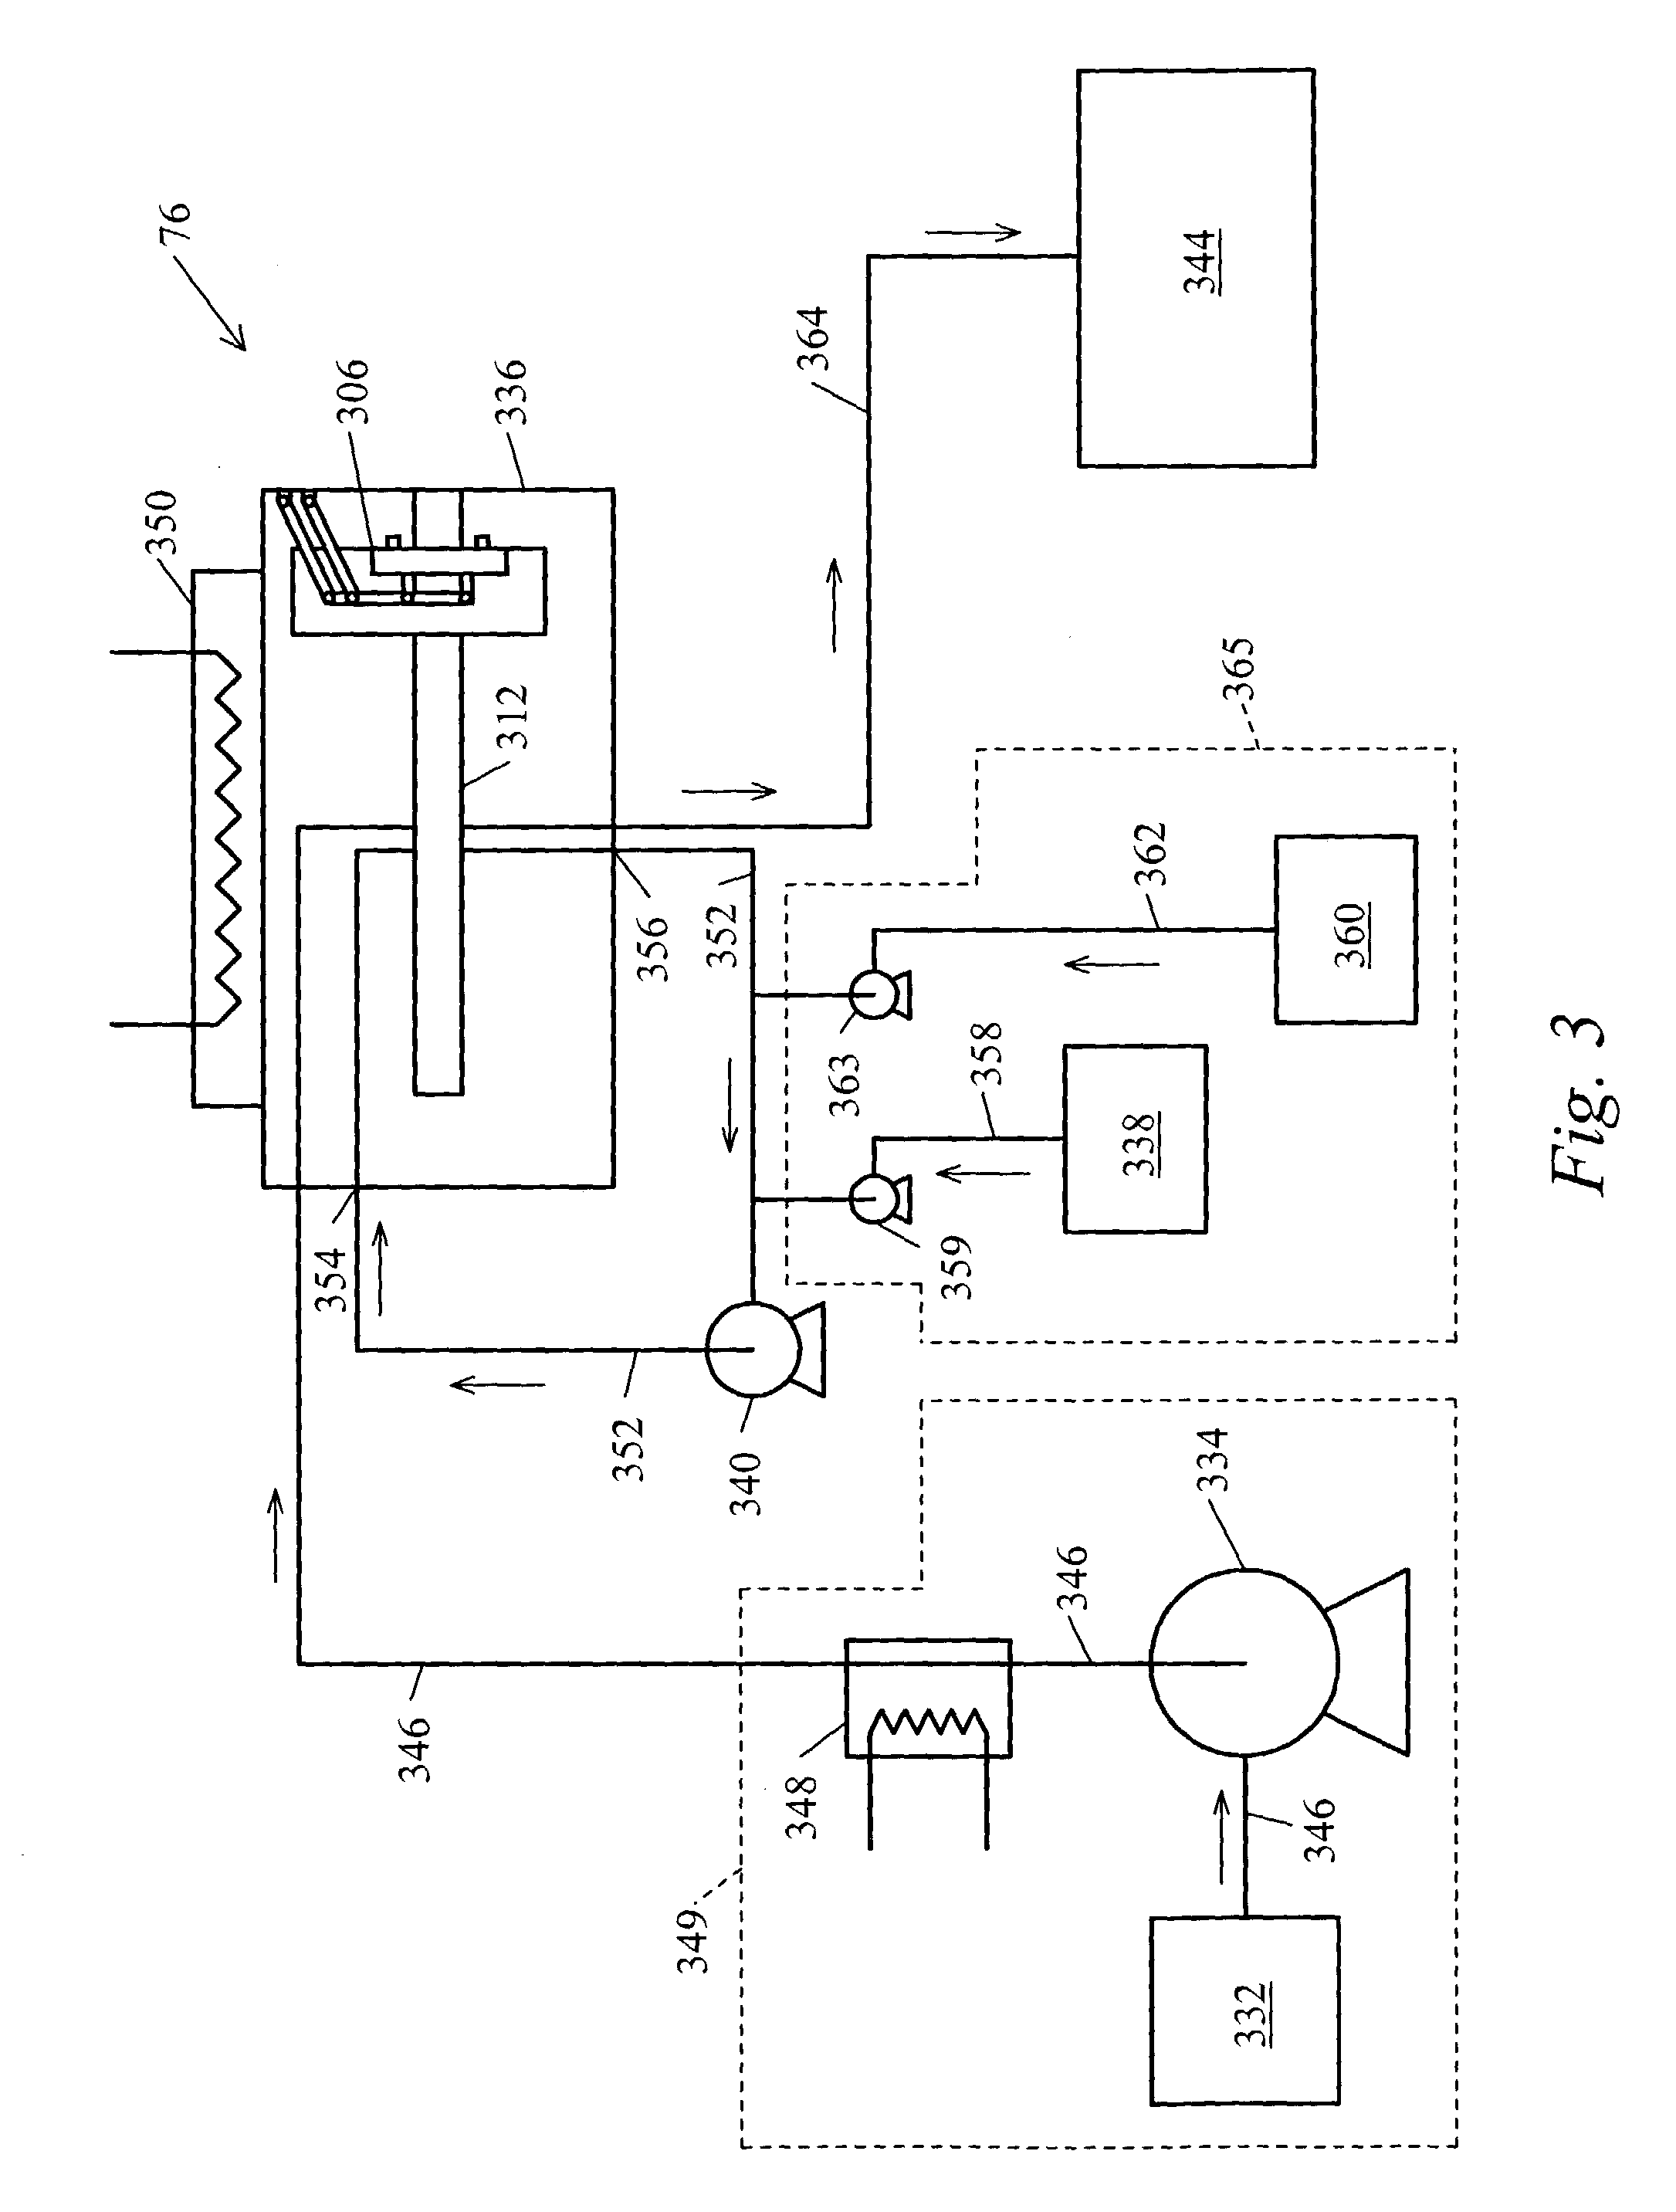 Method of treatment of porous dielectric films to reduce damage during cleaning